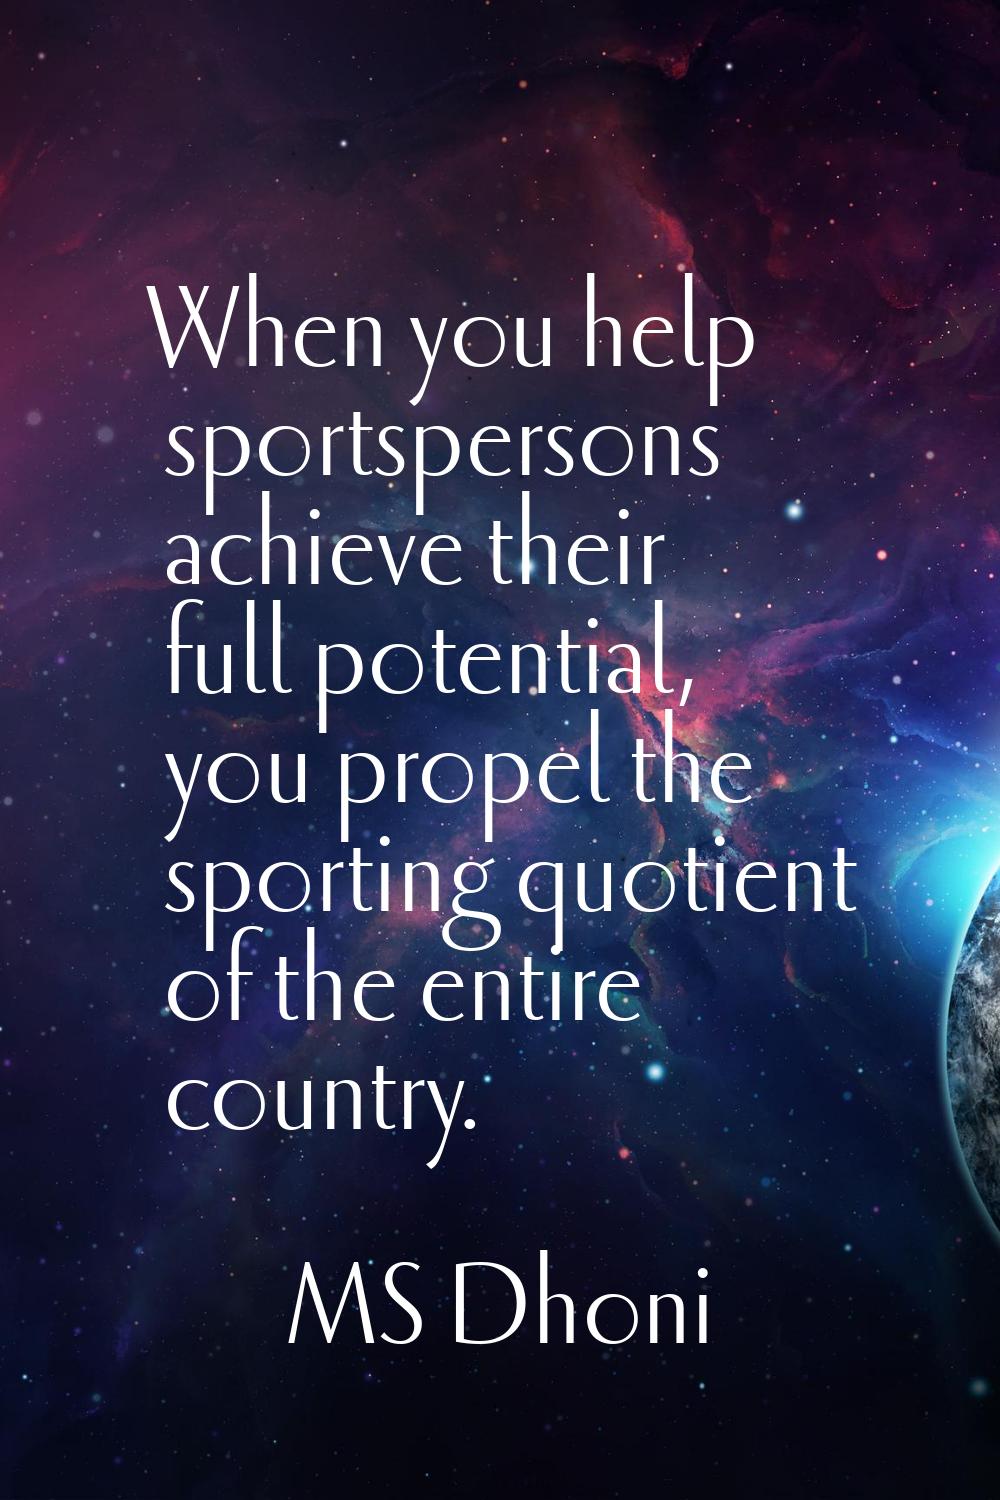 When you help sportspersons achieve their full potential, you propel the sporting quotient of the e